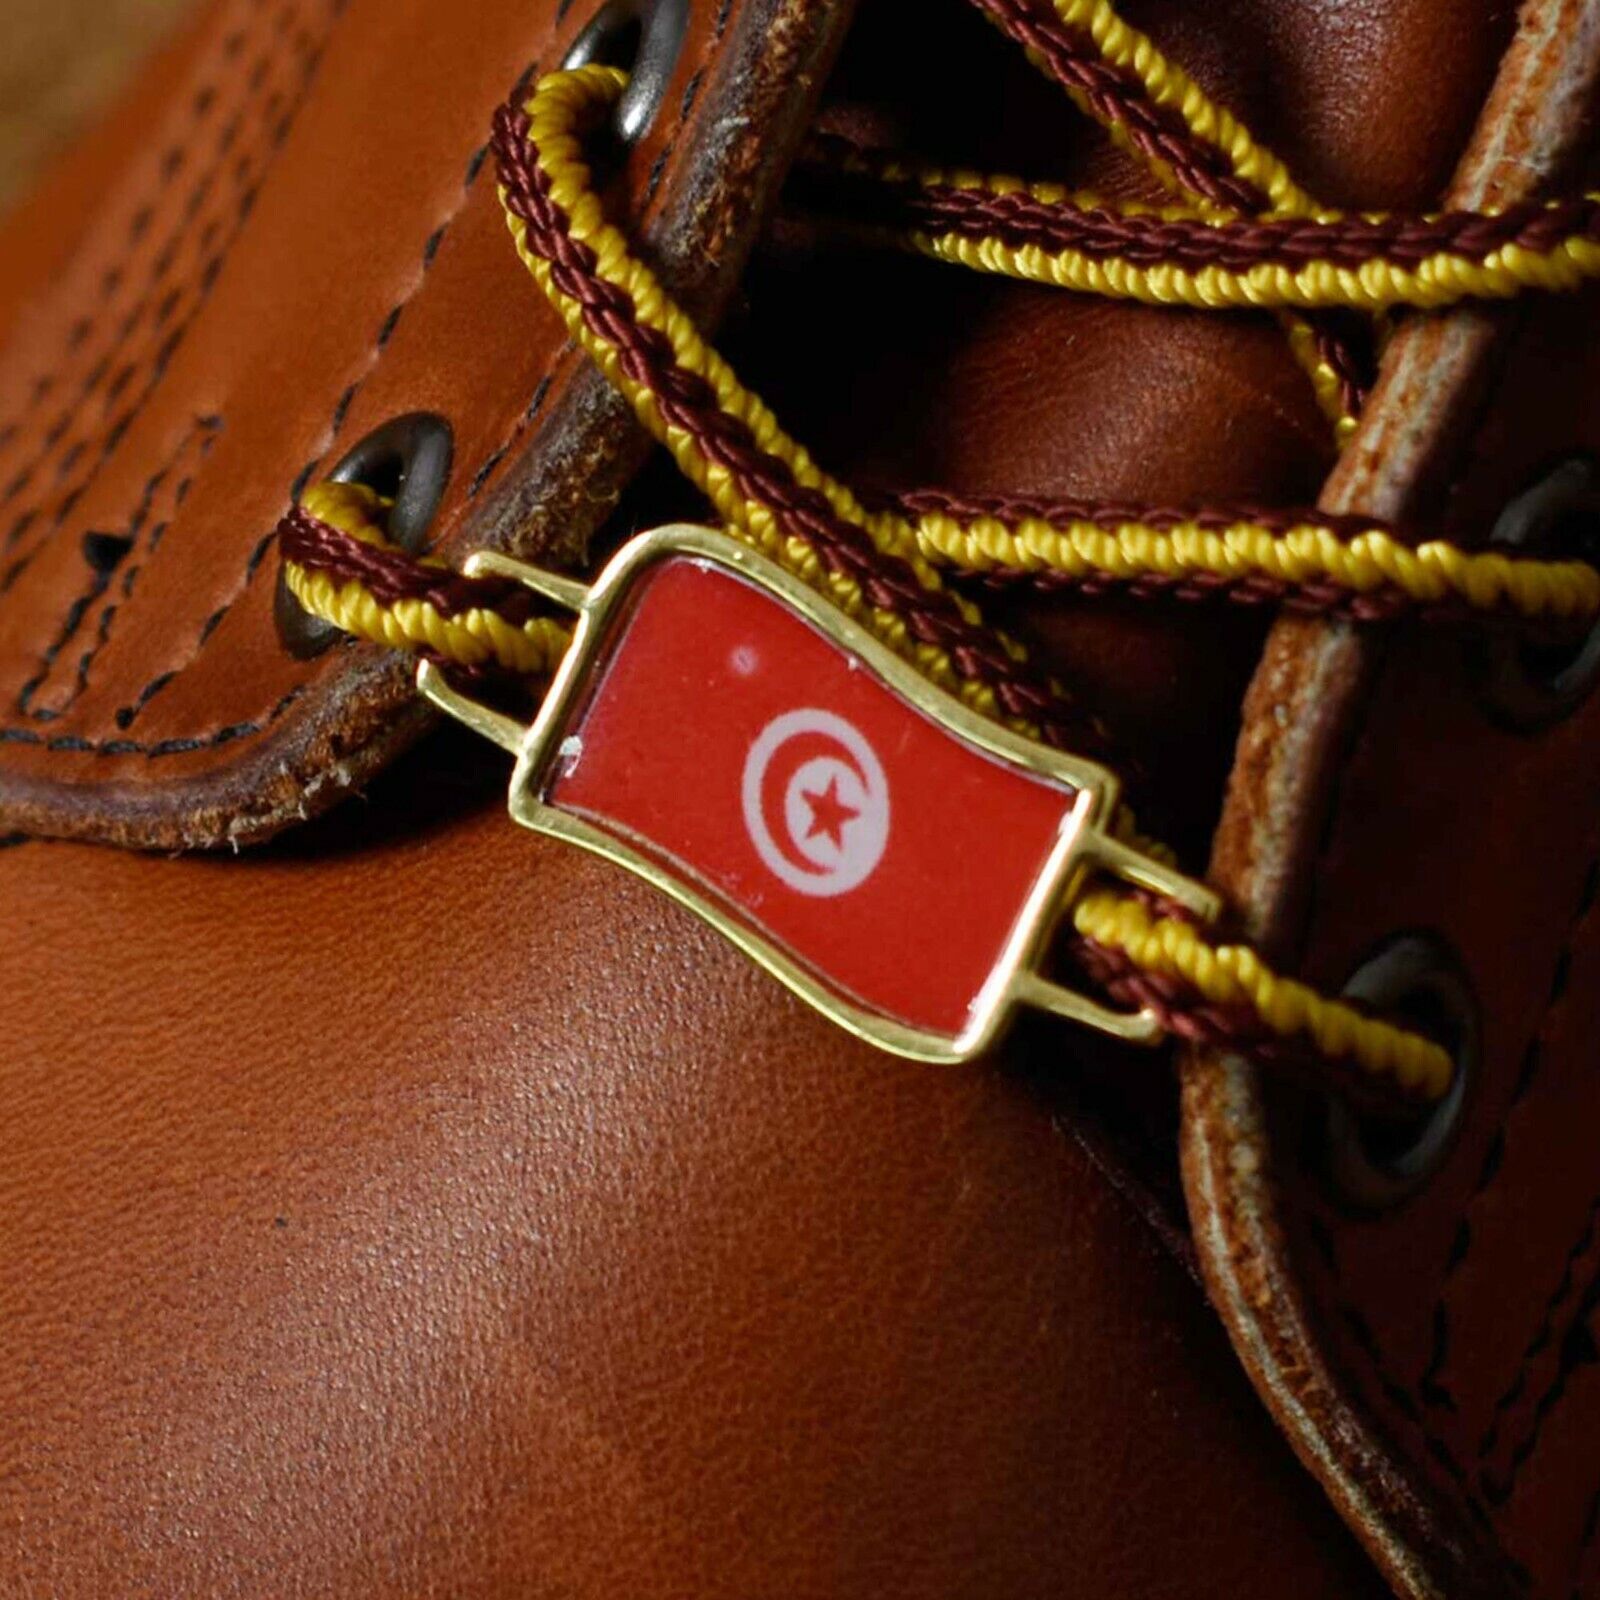 Tunisia Flags Shoes Boot Shoelace Keeper Holder Charm BrooklynMaker